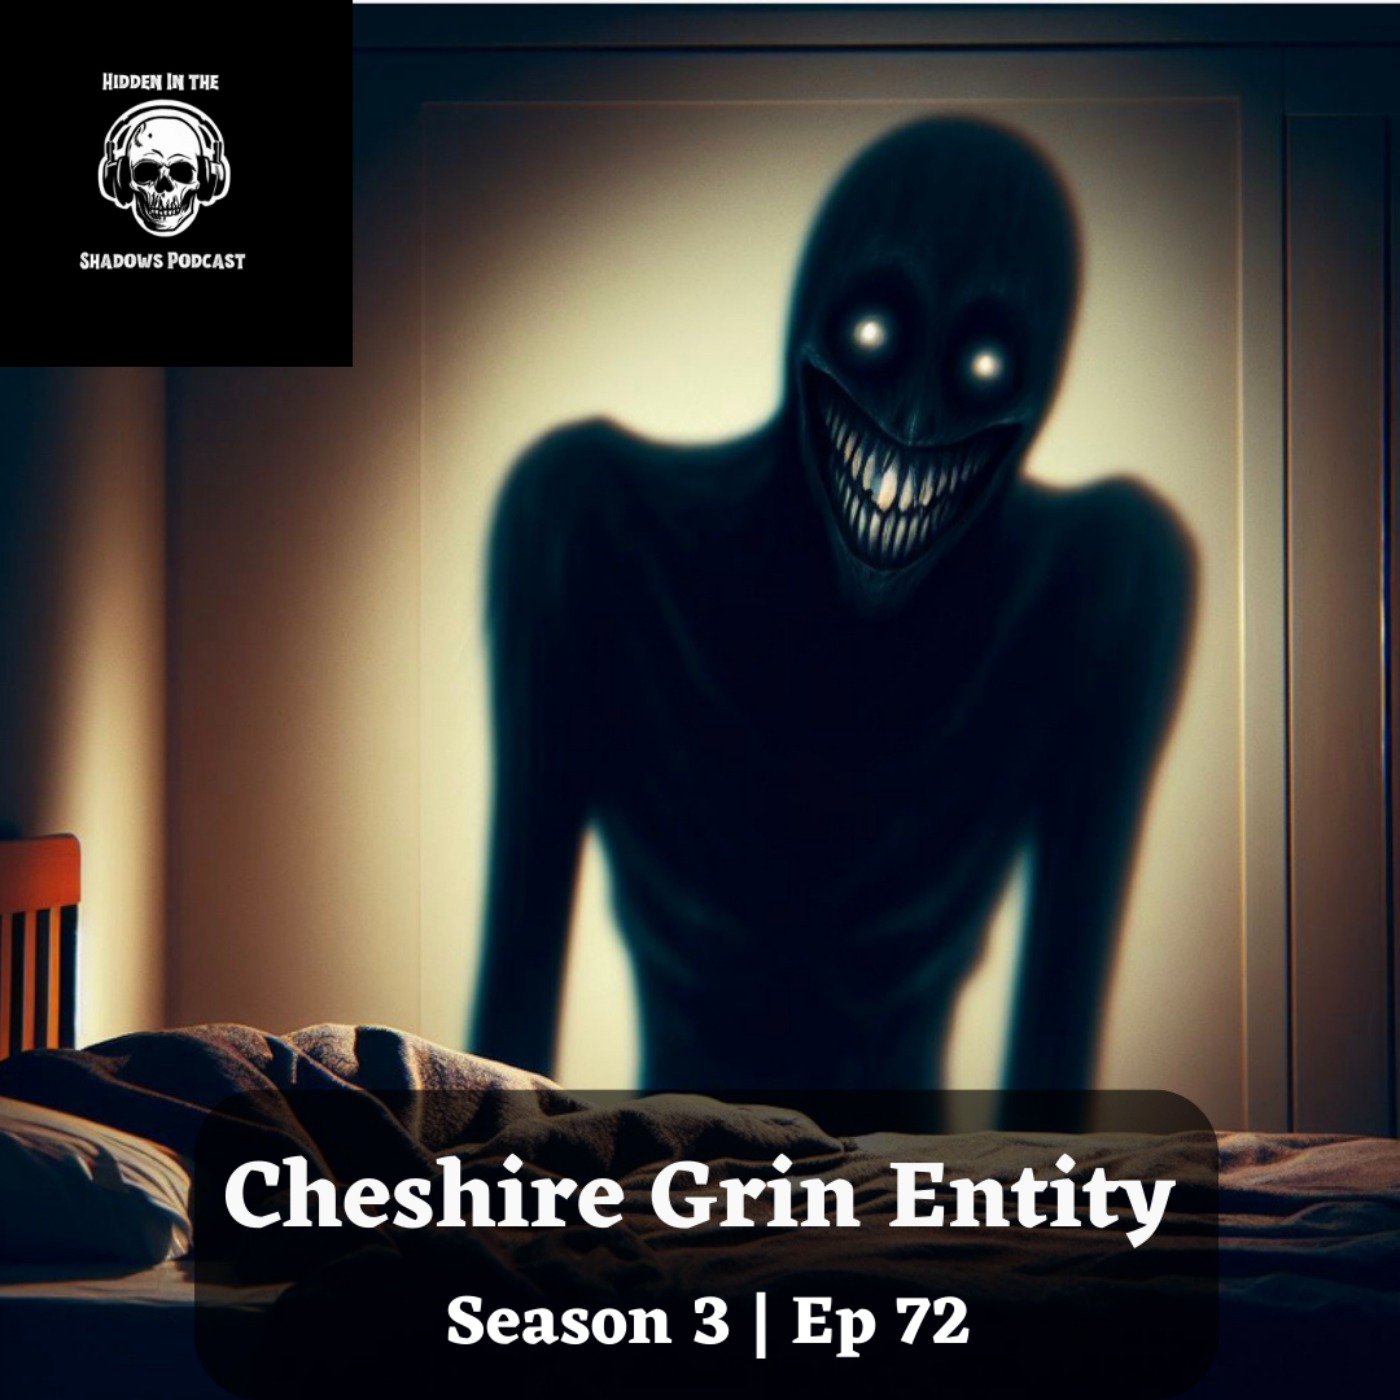 Cheshire Grin Entity